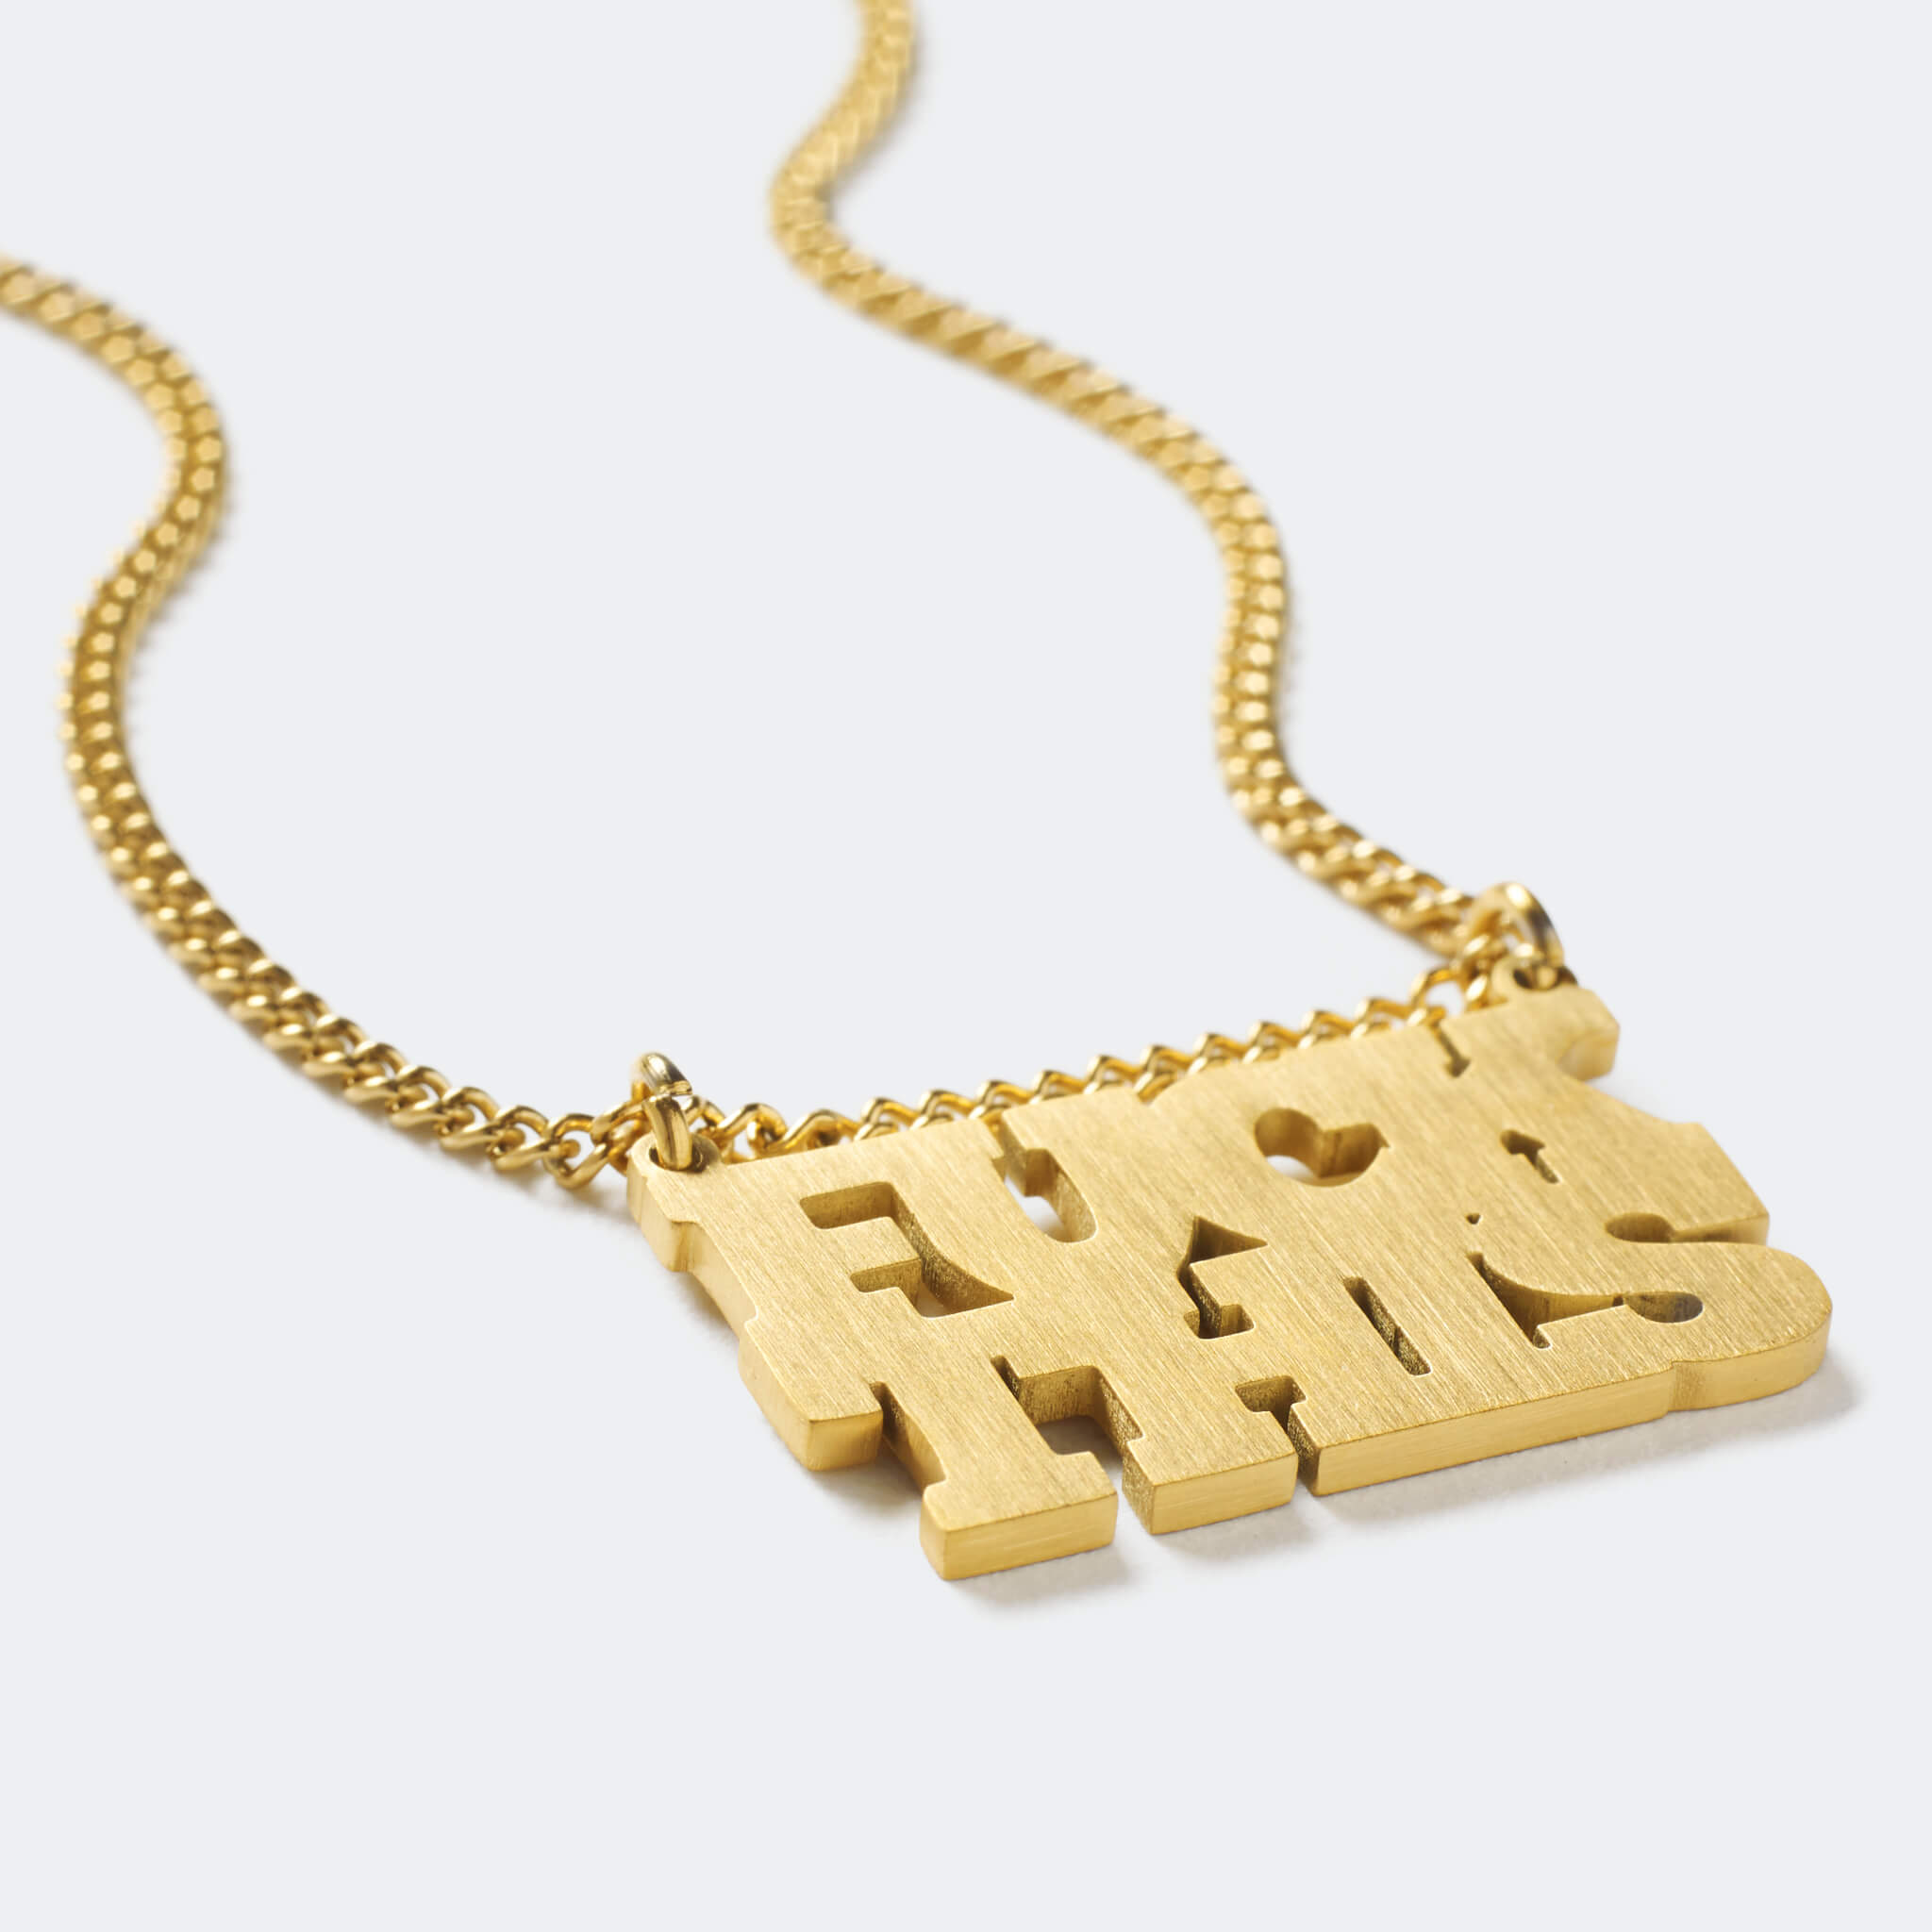 Fuck This Chain